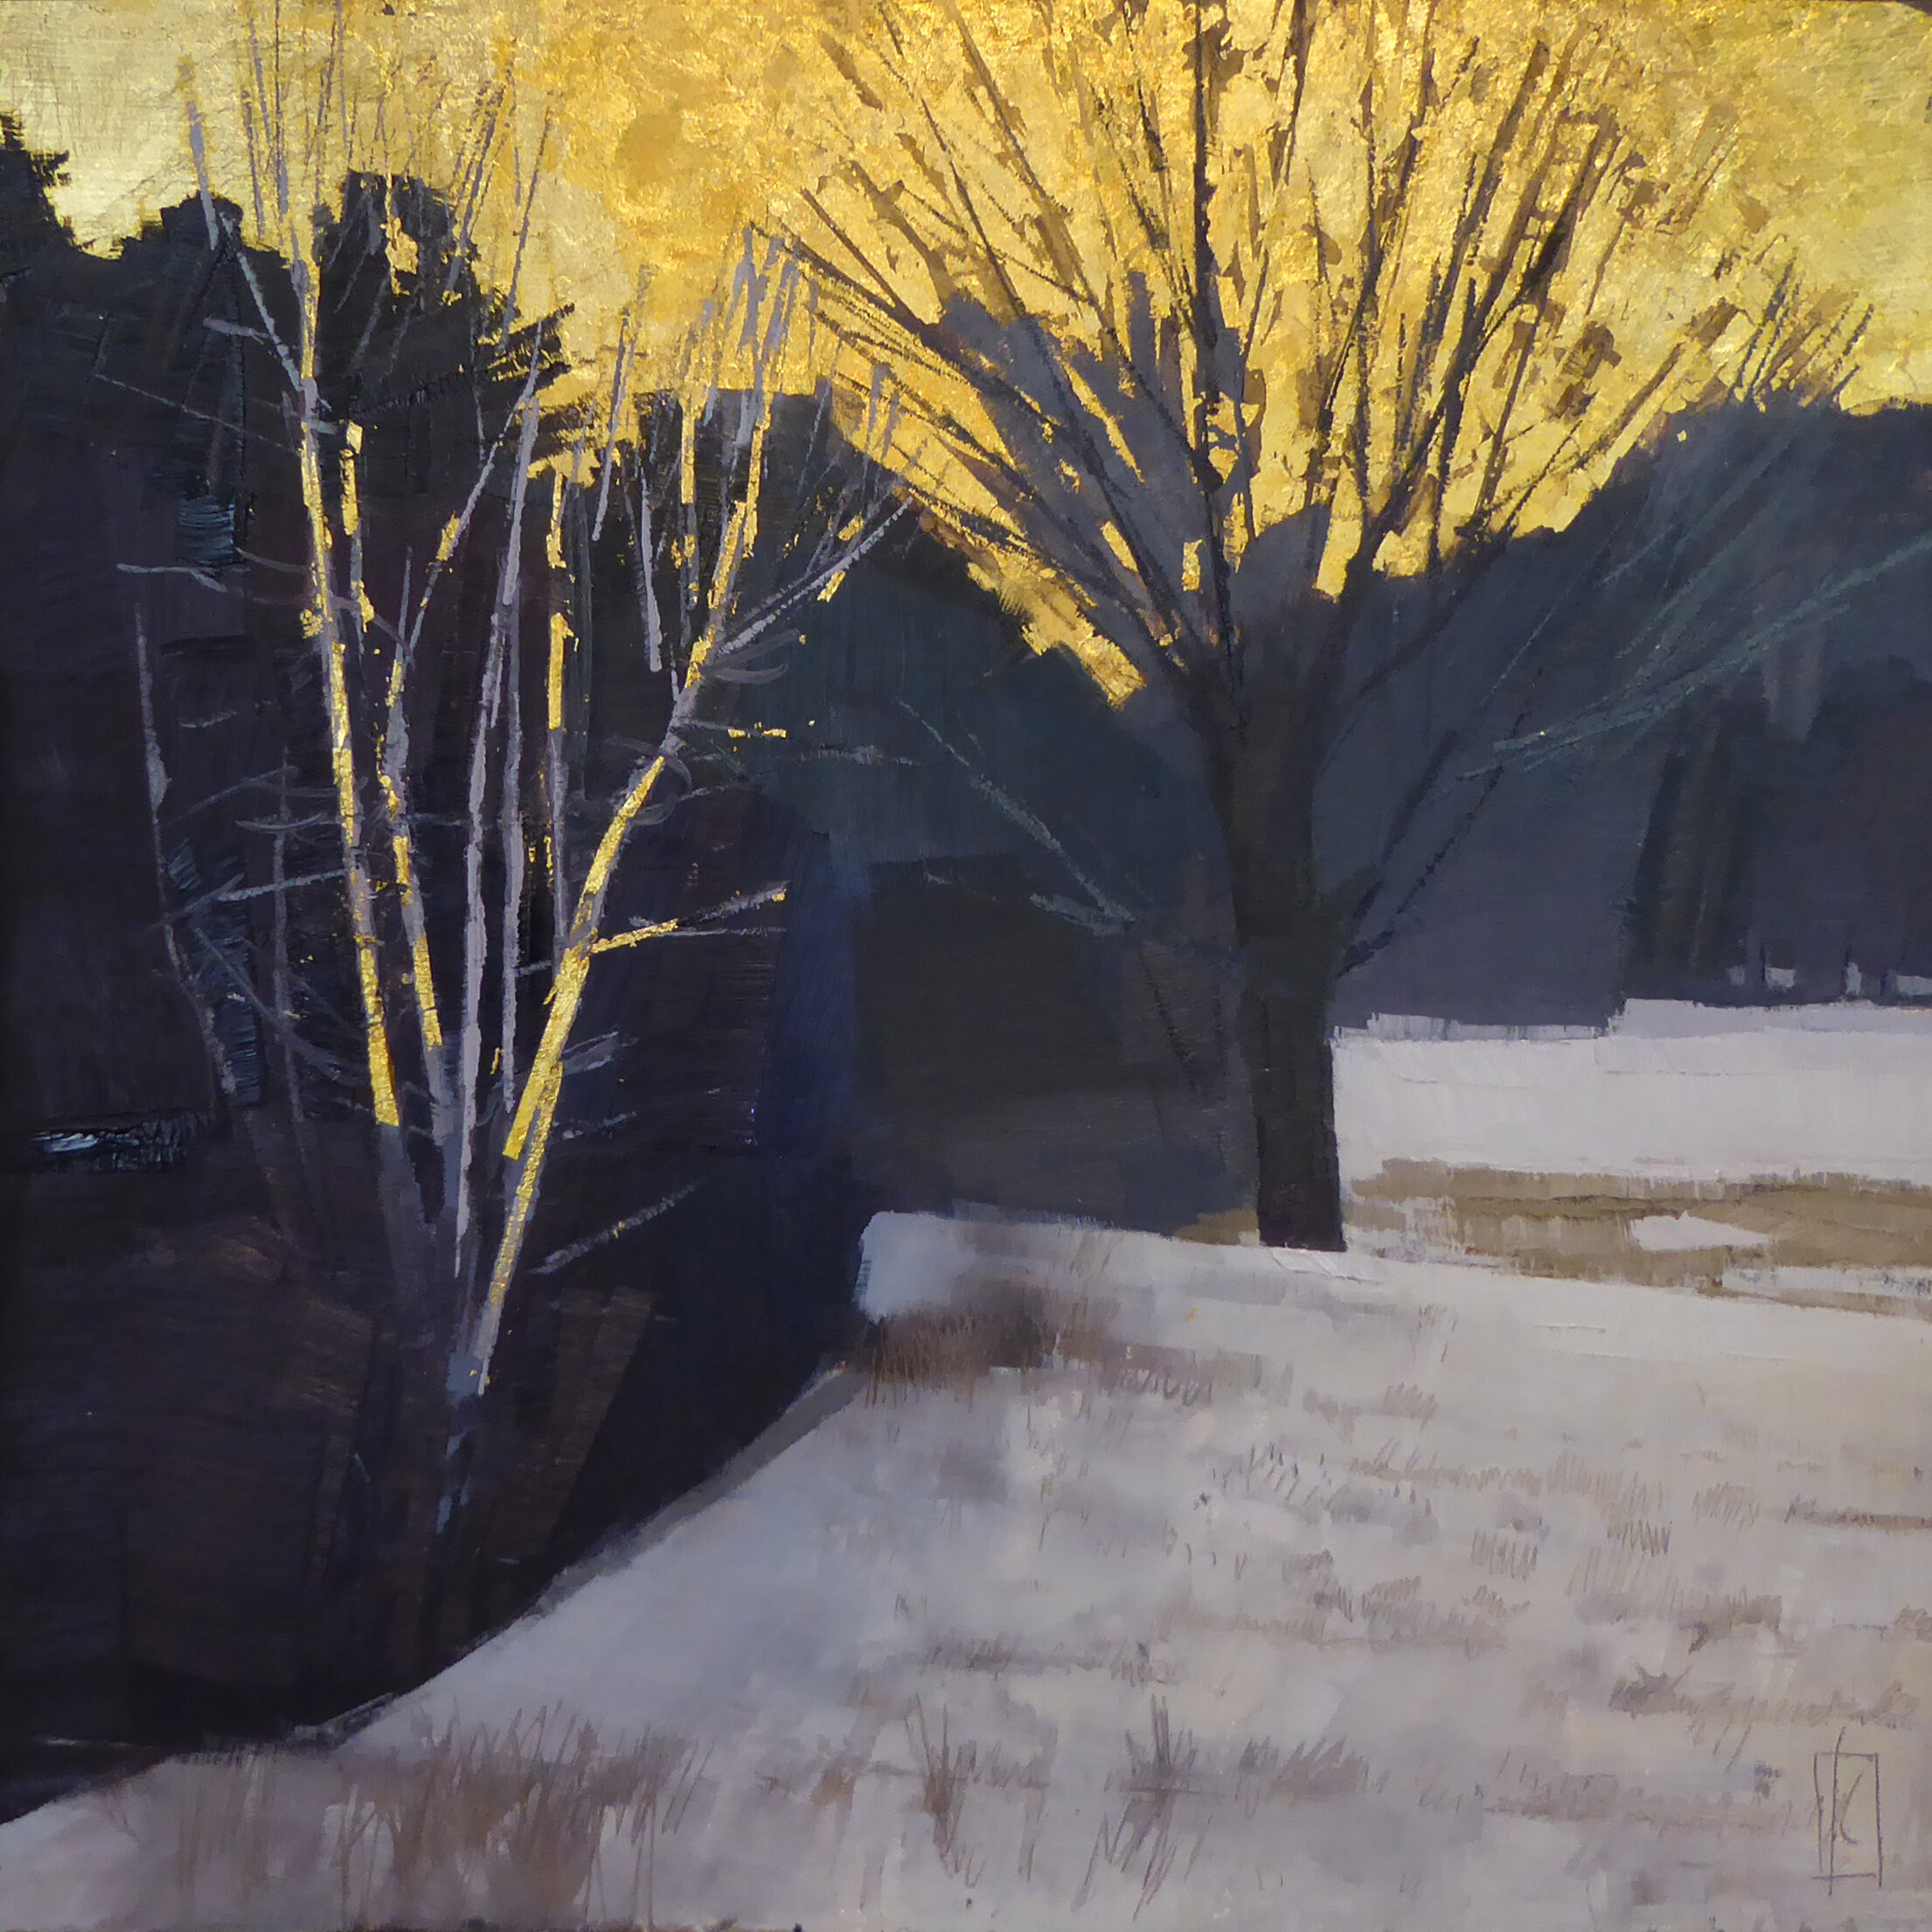   Edge of the Woods  12 x 12 oil and 24k gold on clay panel  sold Alpers Fine Art 